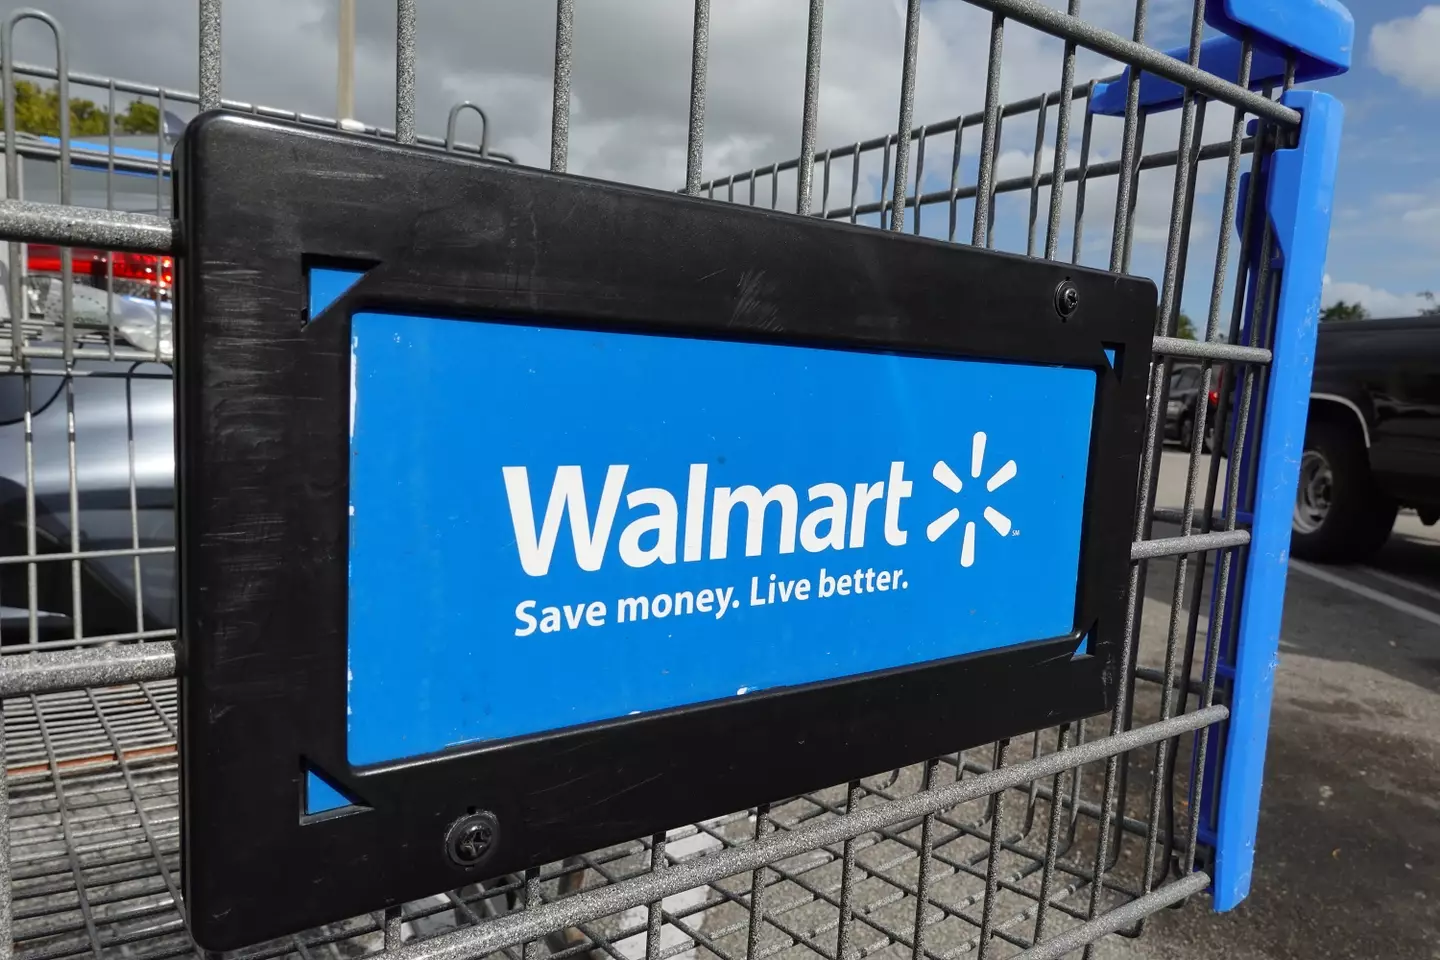 Walmart's CEO said back in 2022 that stores would be closed due to rising thefts.